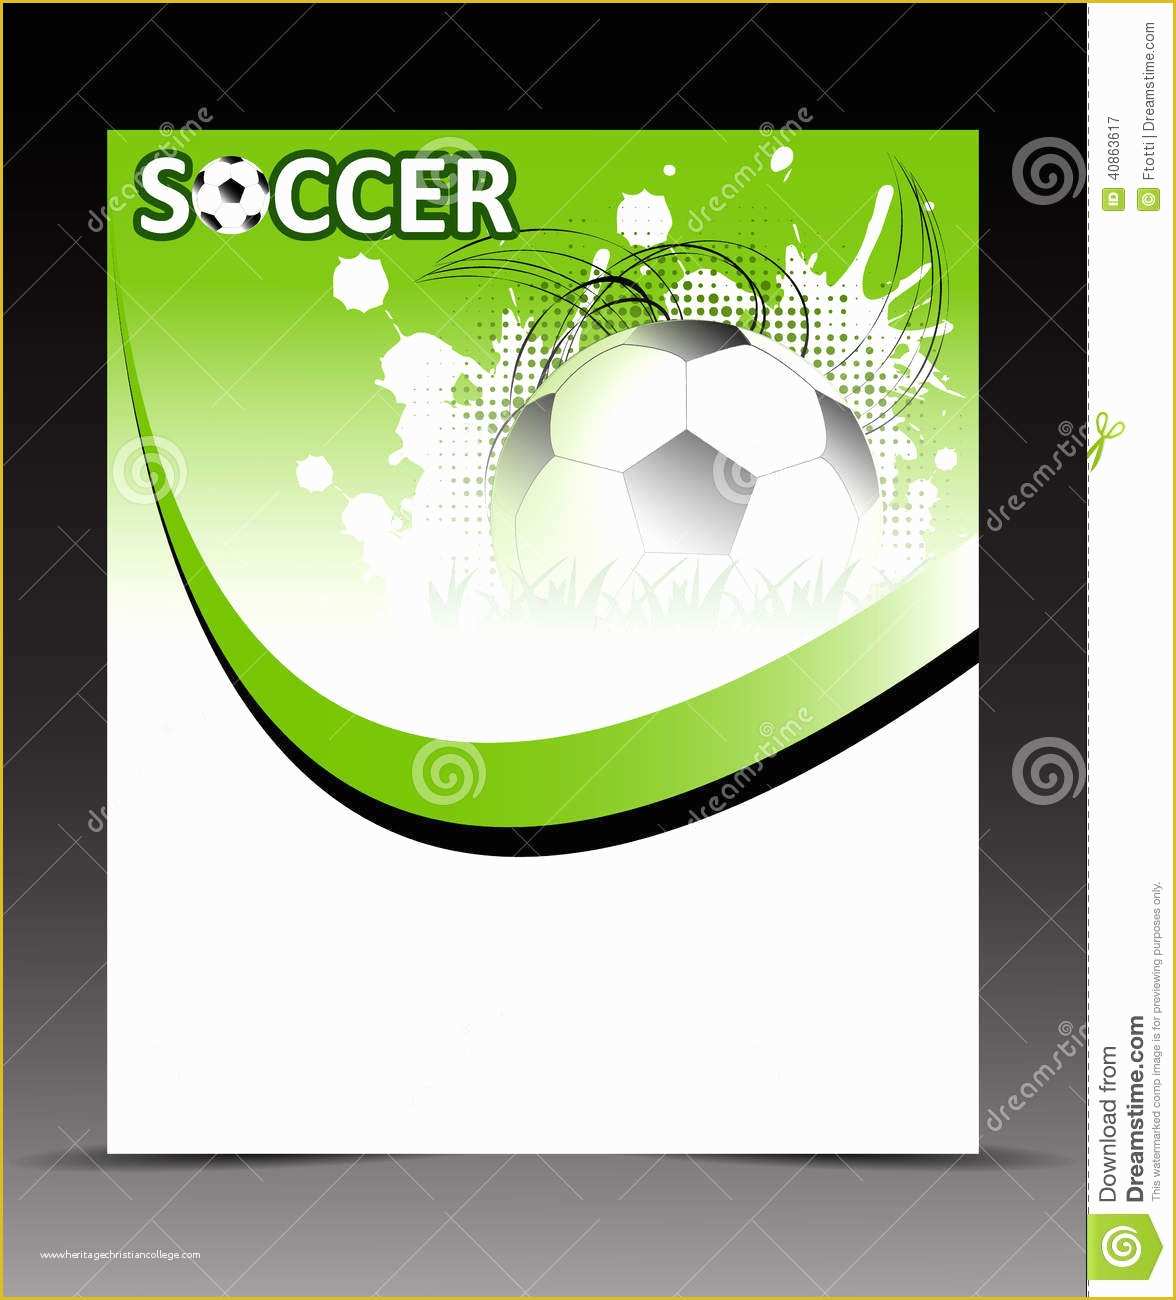 Free soccer Team Photo Templates Of Template Flyer with soccer Ball Abstract Background